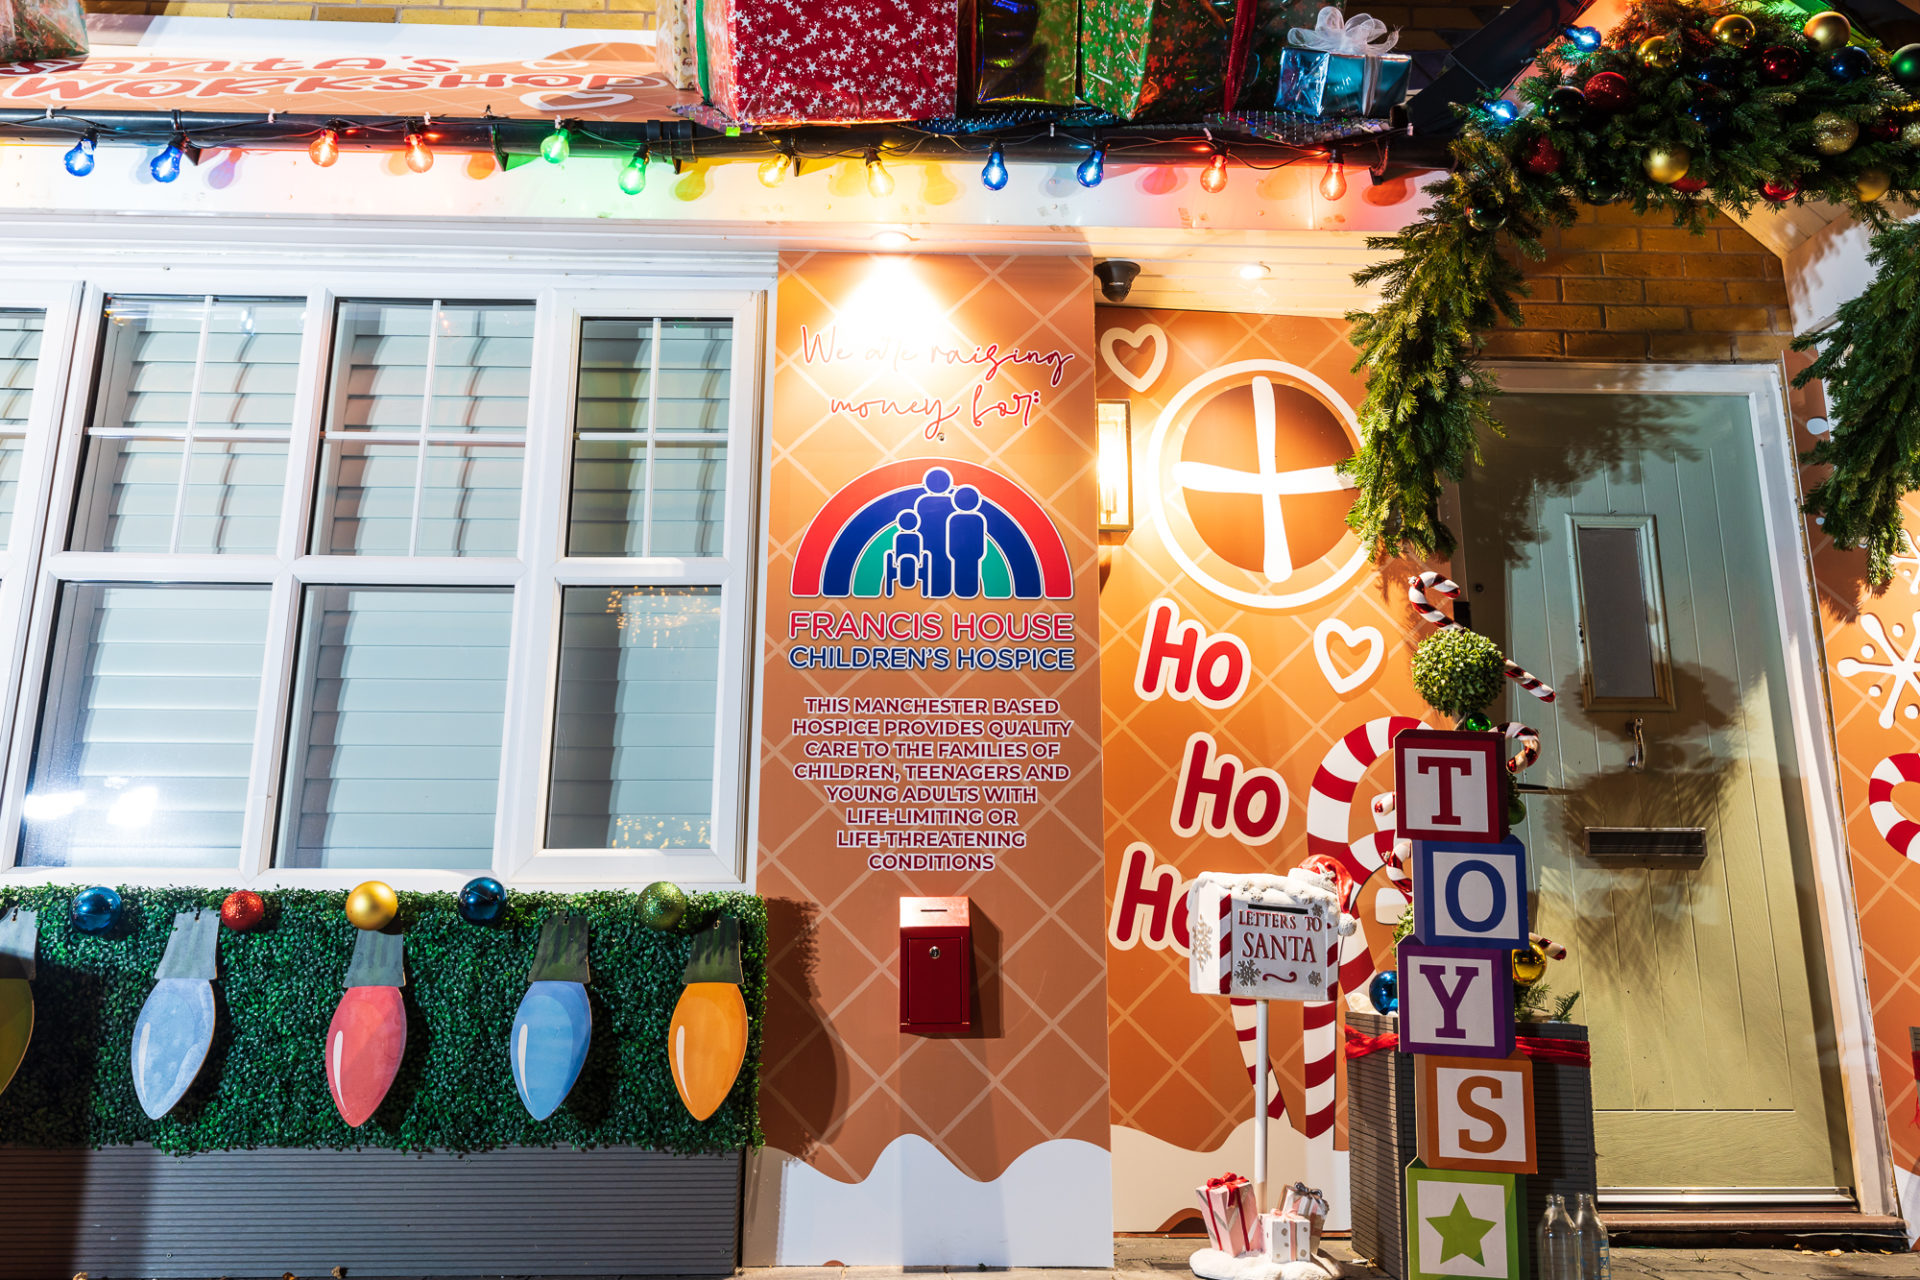 House decorated with lights and Francis House charity box